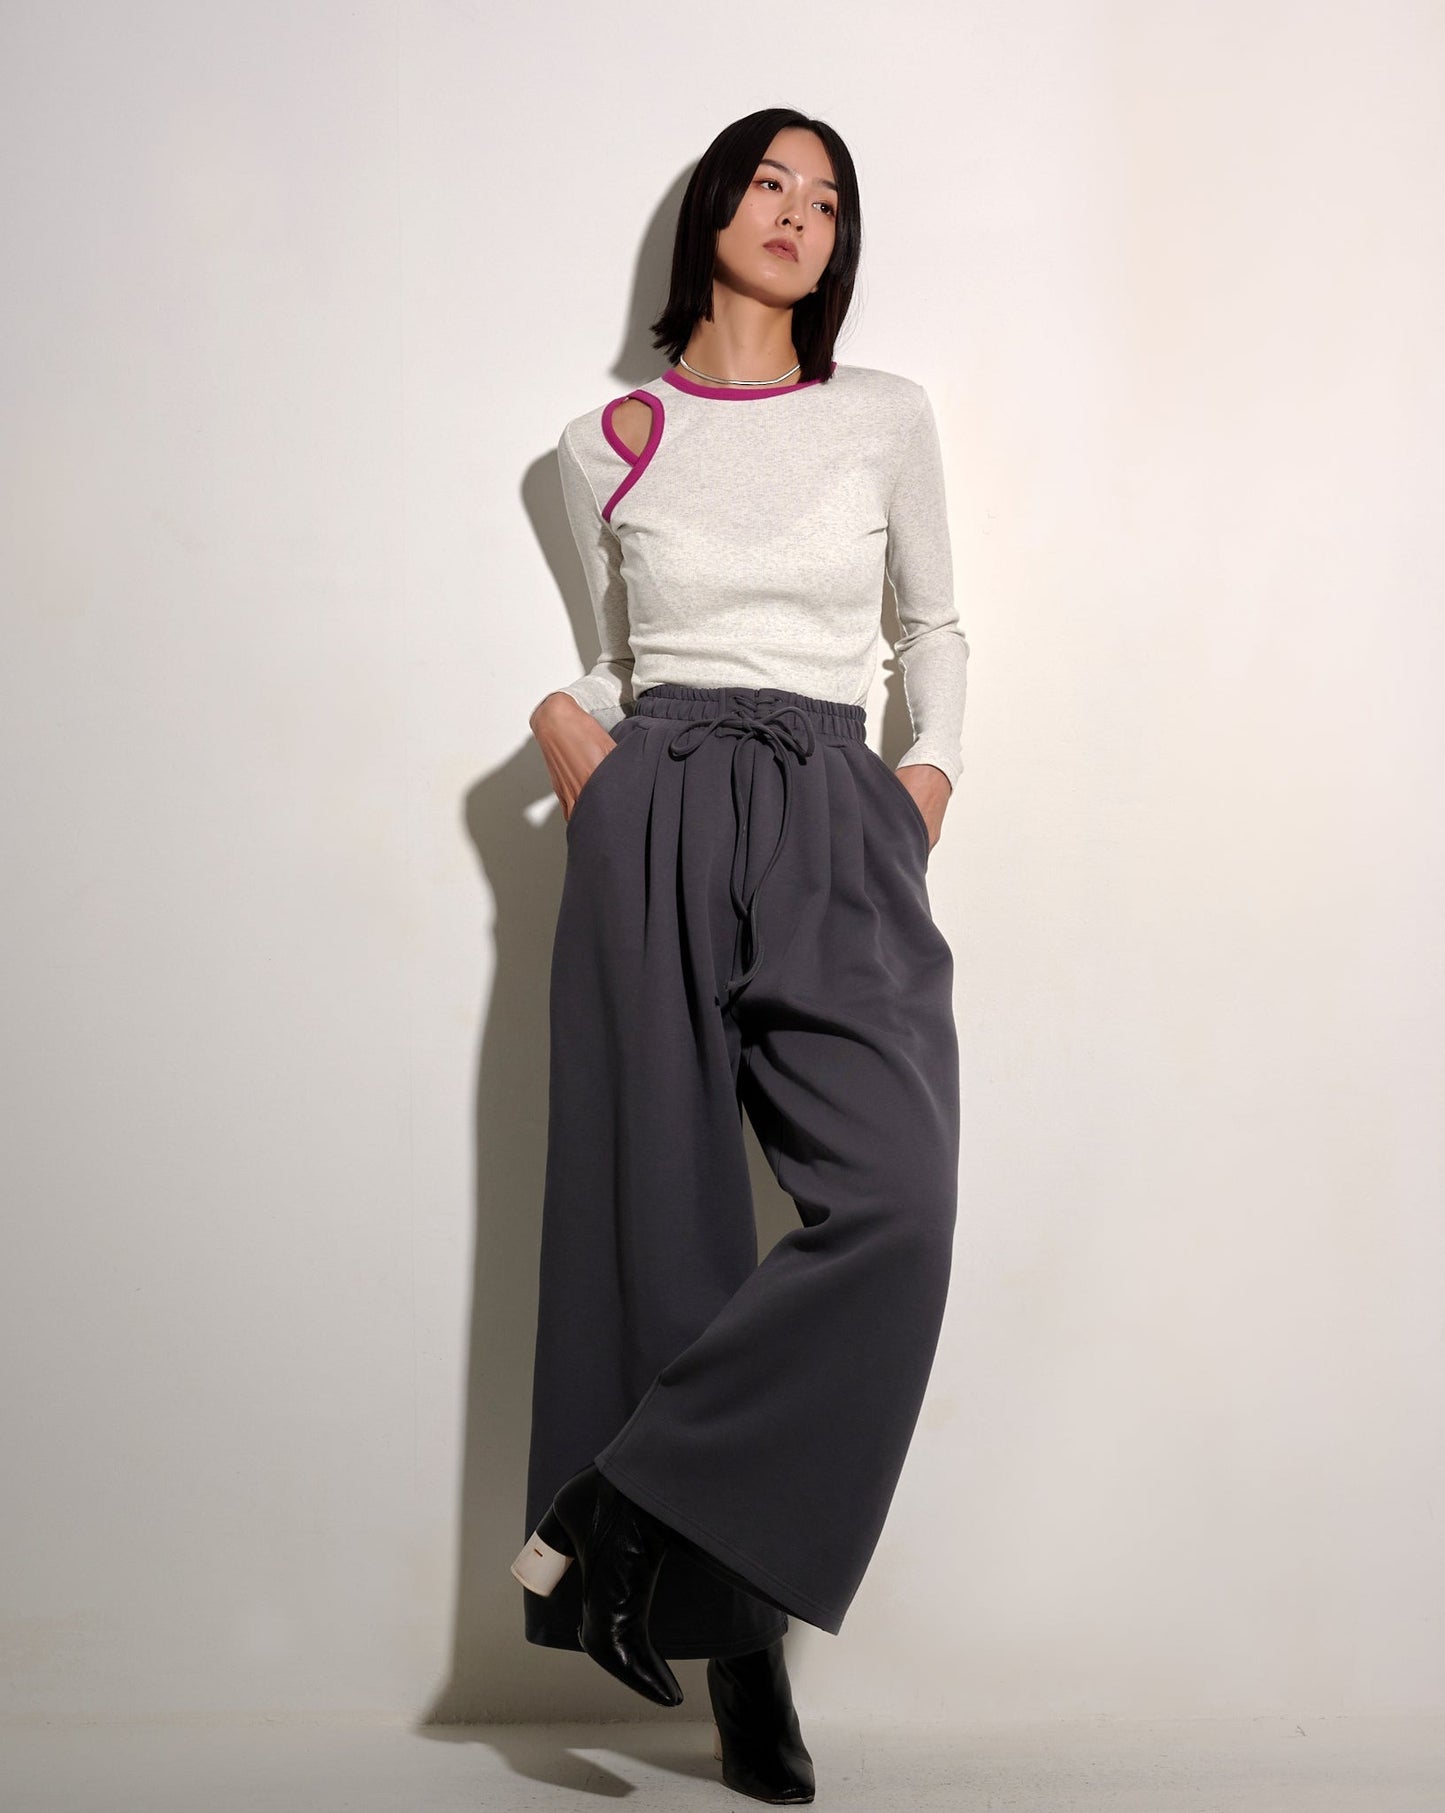 The Pintucked Straight Leg Pant in Double Knit